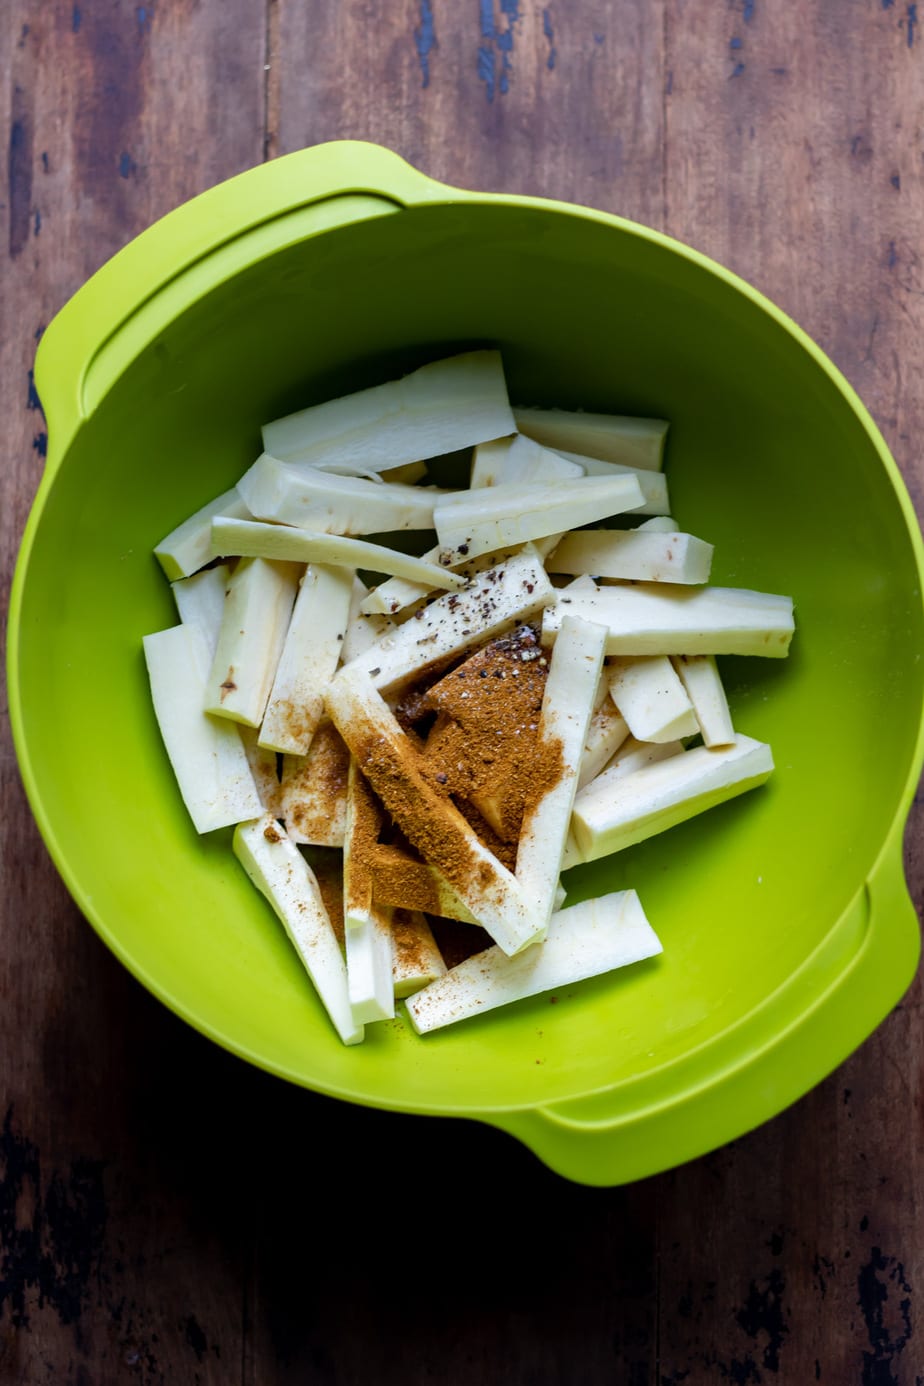 Bowl of parsnip strips and spices.